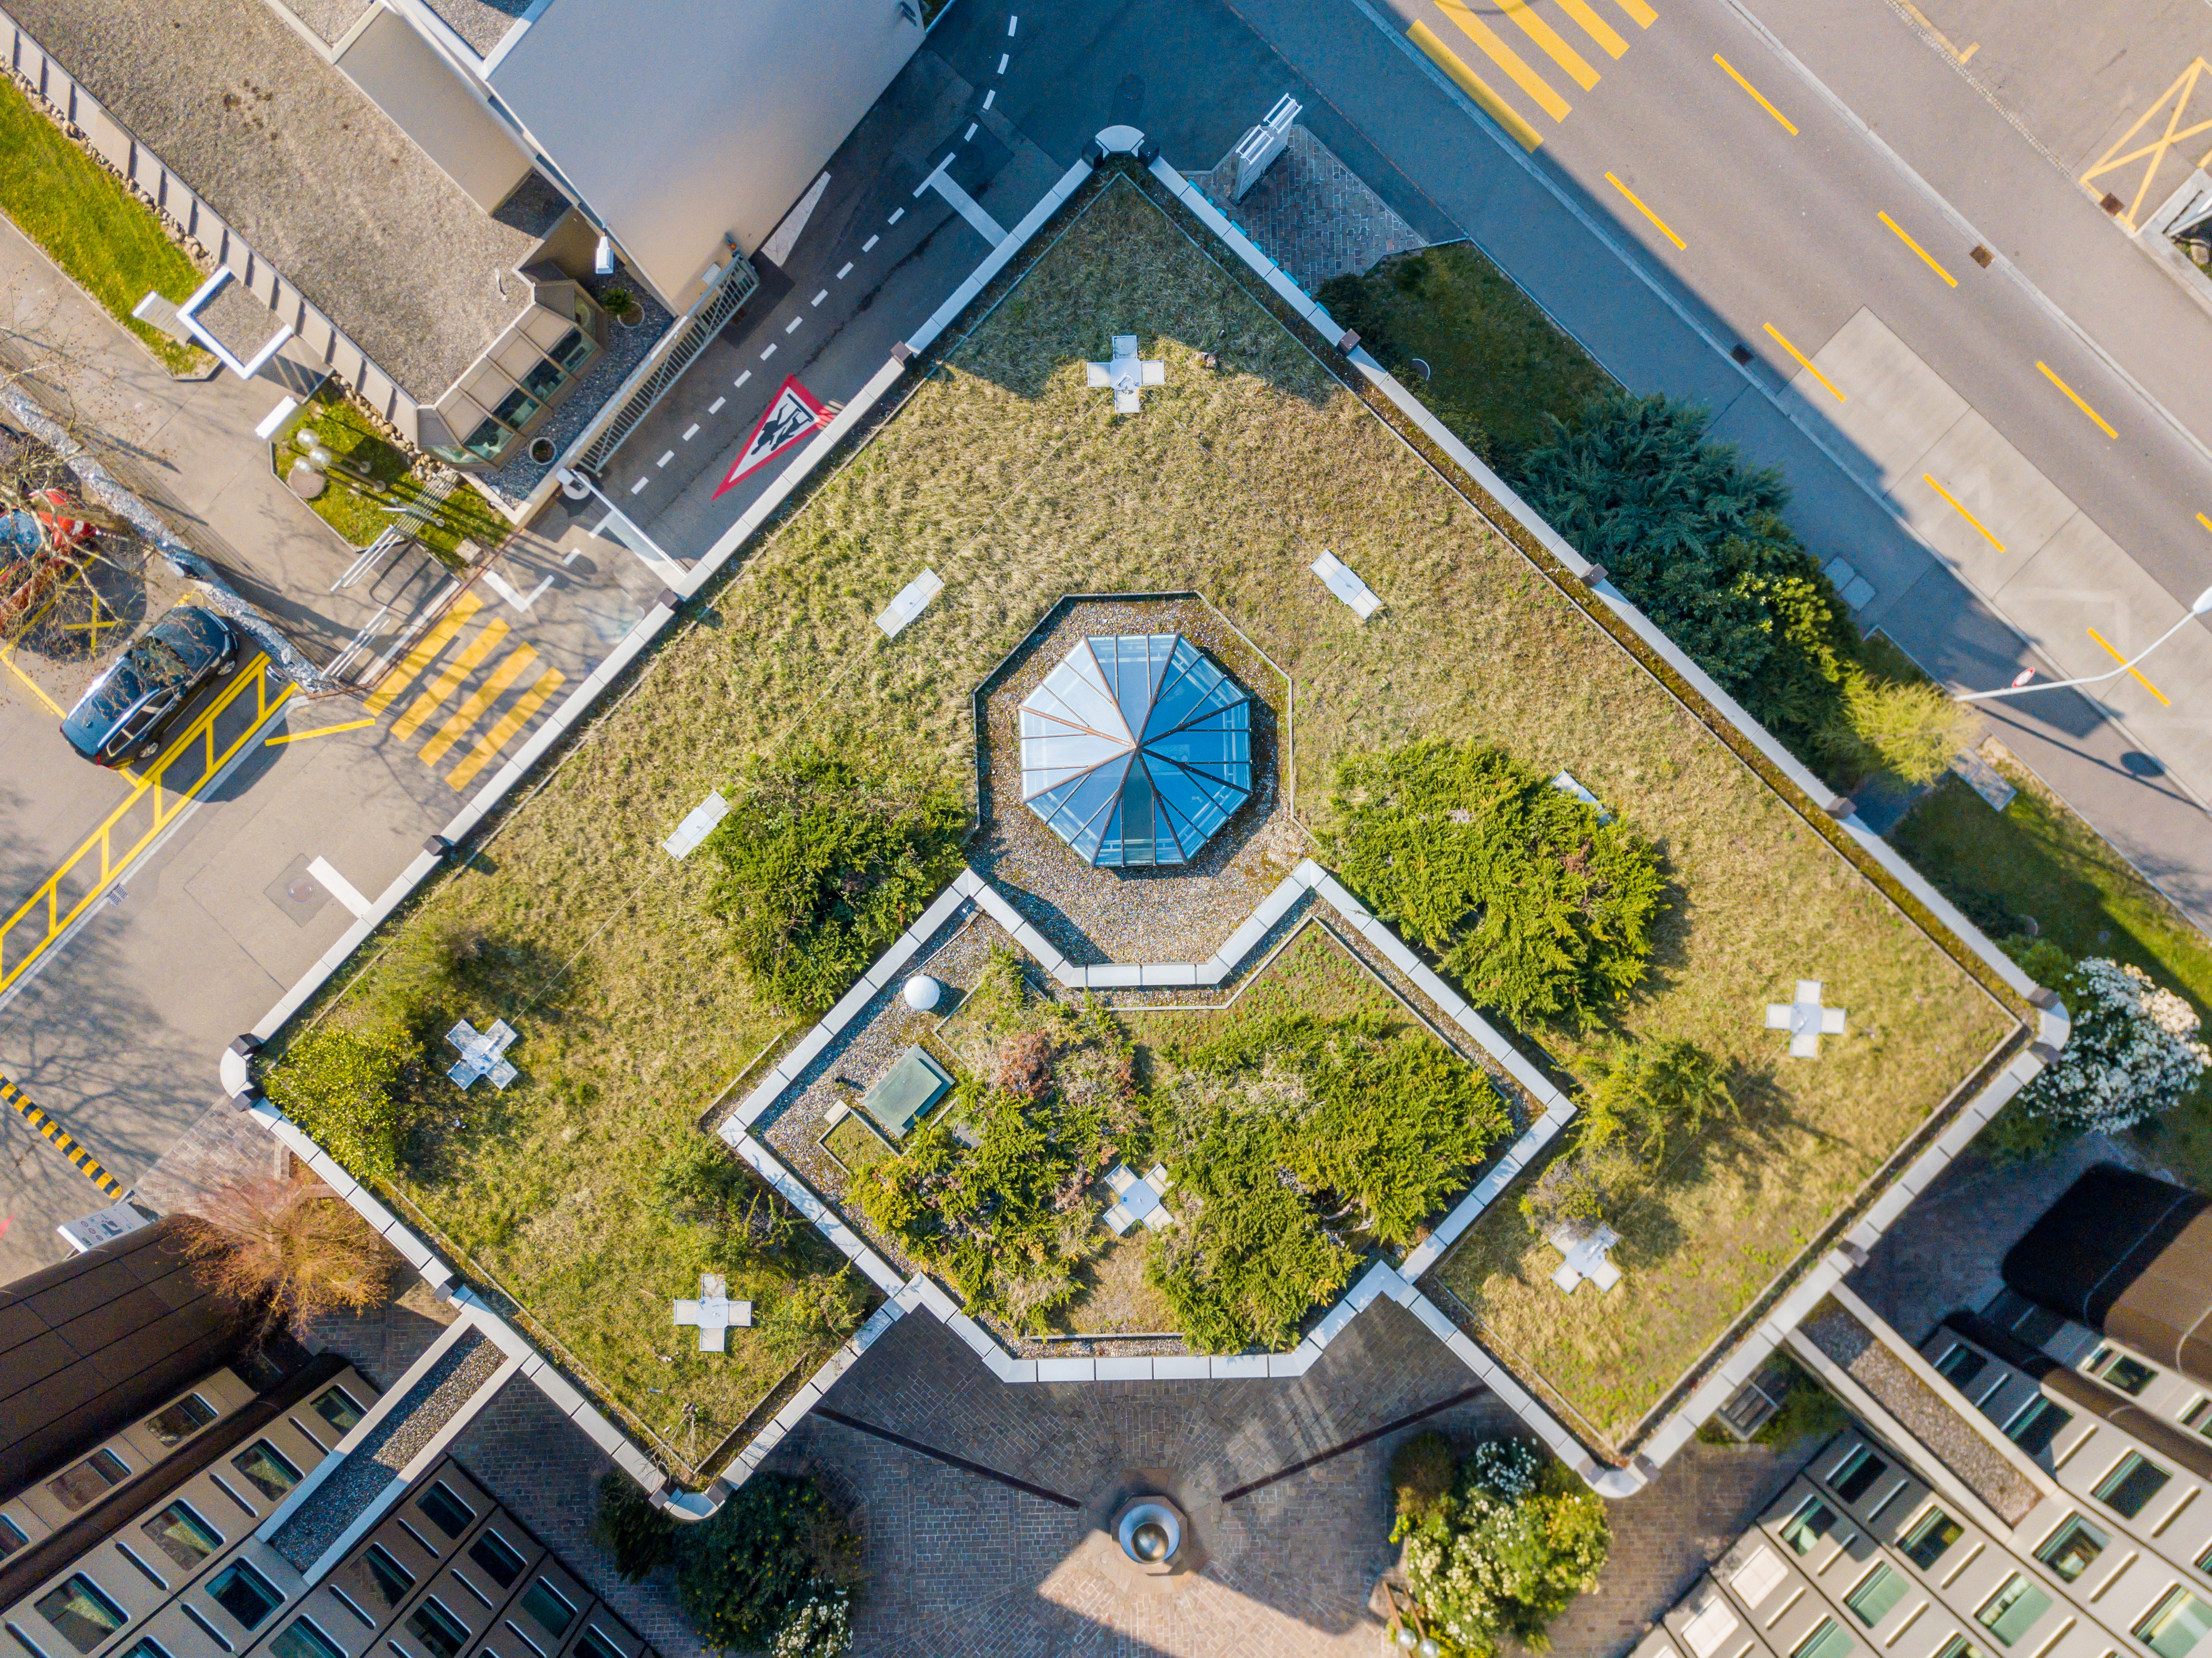 Aerial view of rooftop garden in urban residential area; Shutterstock ID 1361273999; purchase_order: NA; job: Property Journal May 22; client: RICS; other: 